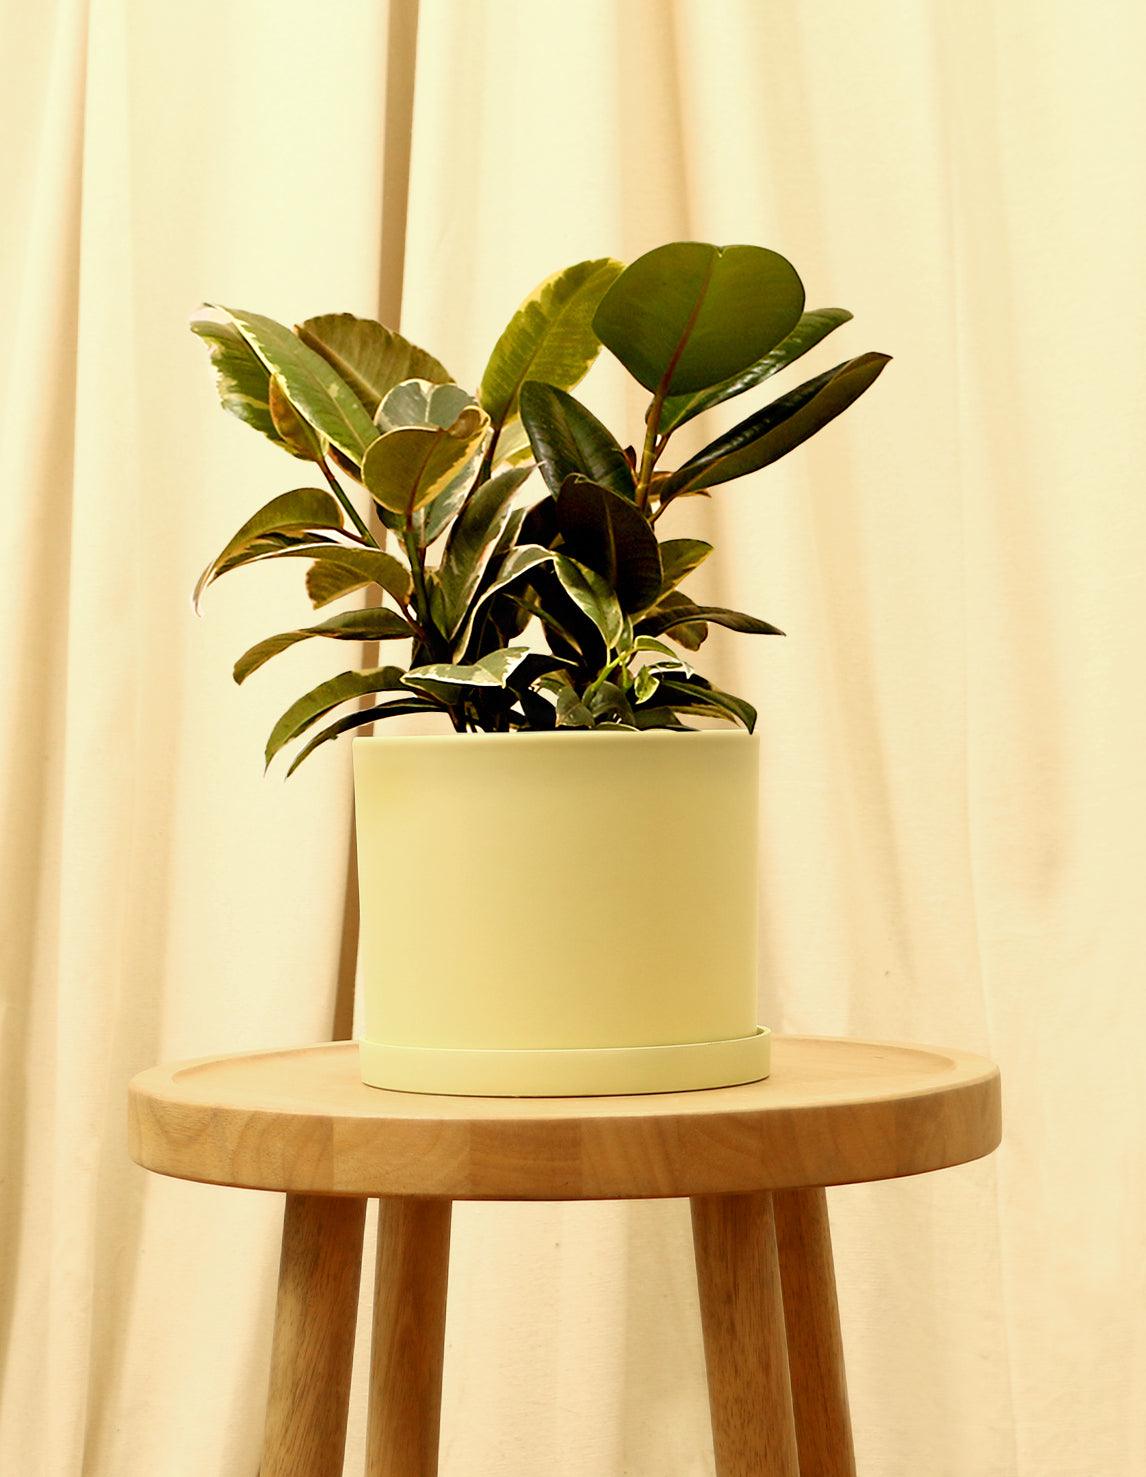 Medium Variegated Rubber Fig Plant in yellow pot.